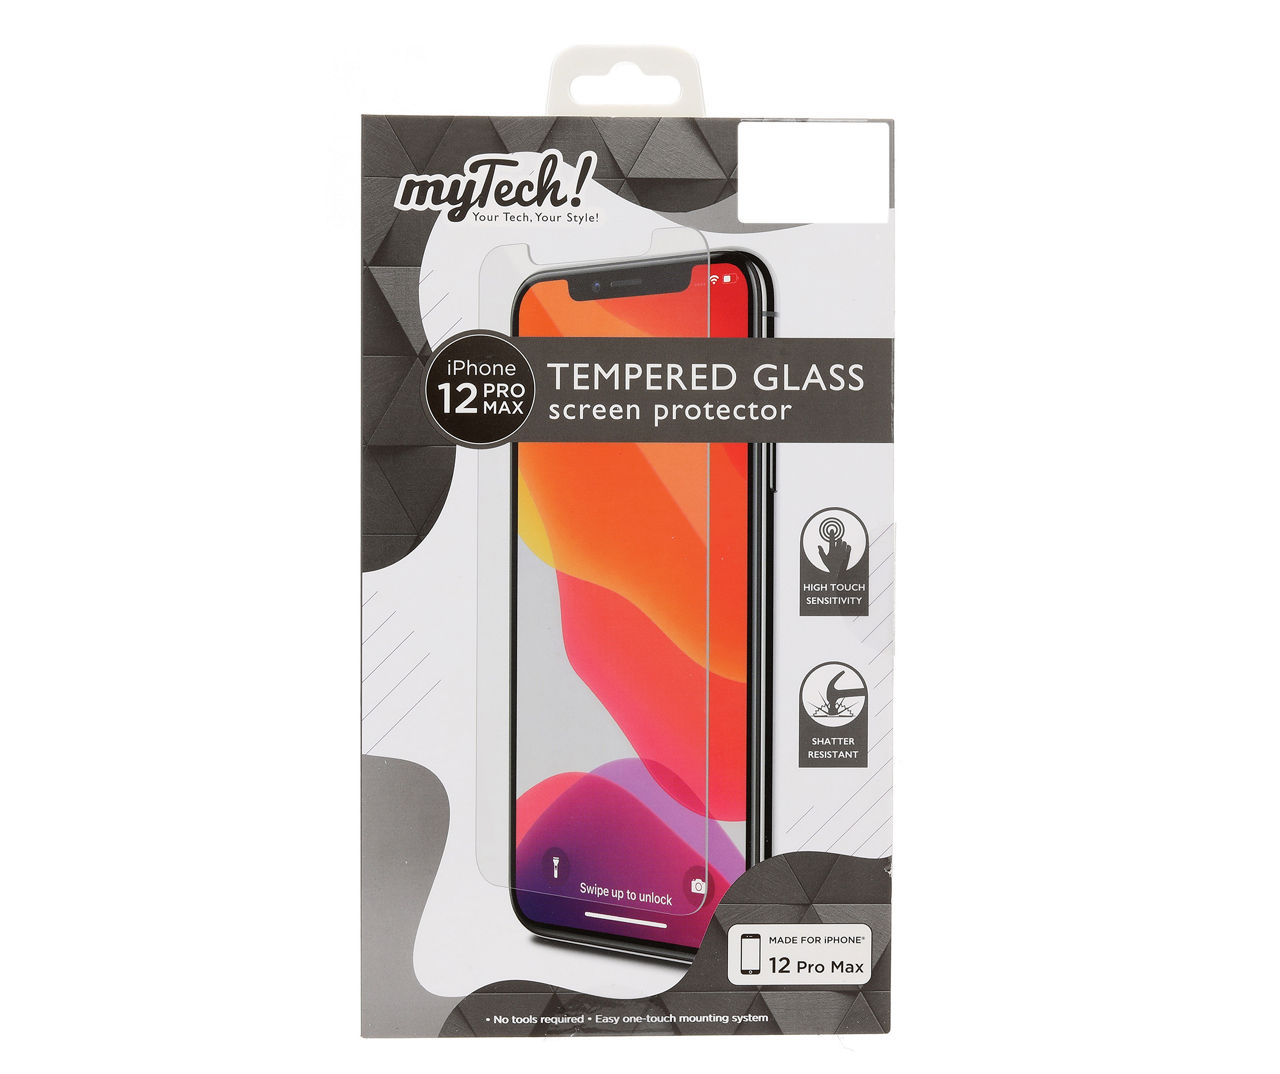 Tempered Glass iPhone 12 Pro Max Screen Protector